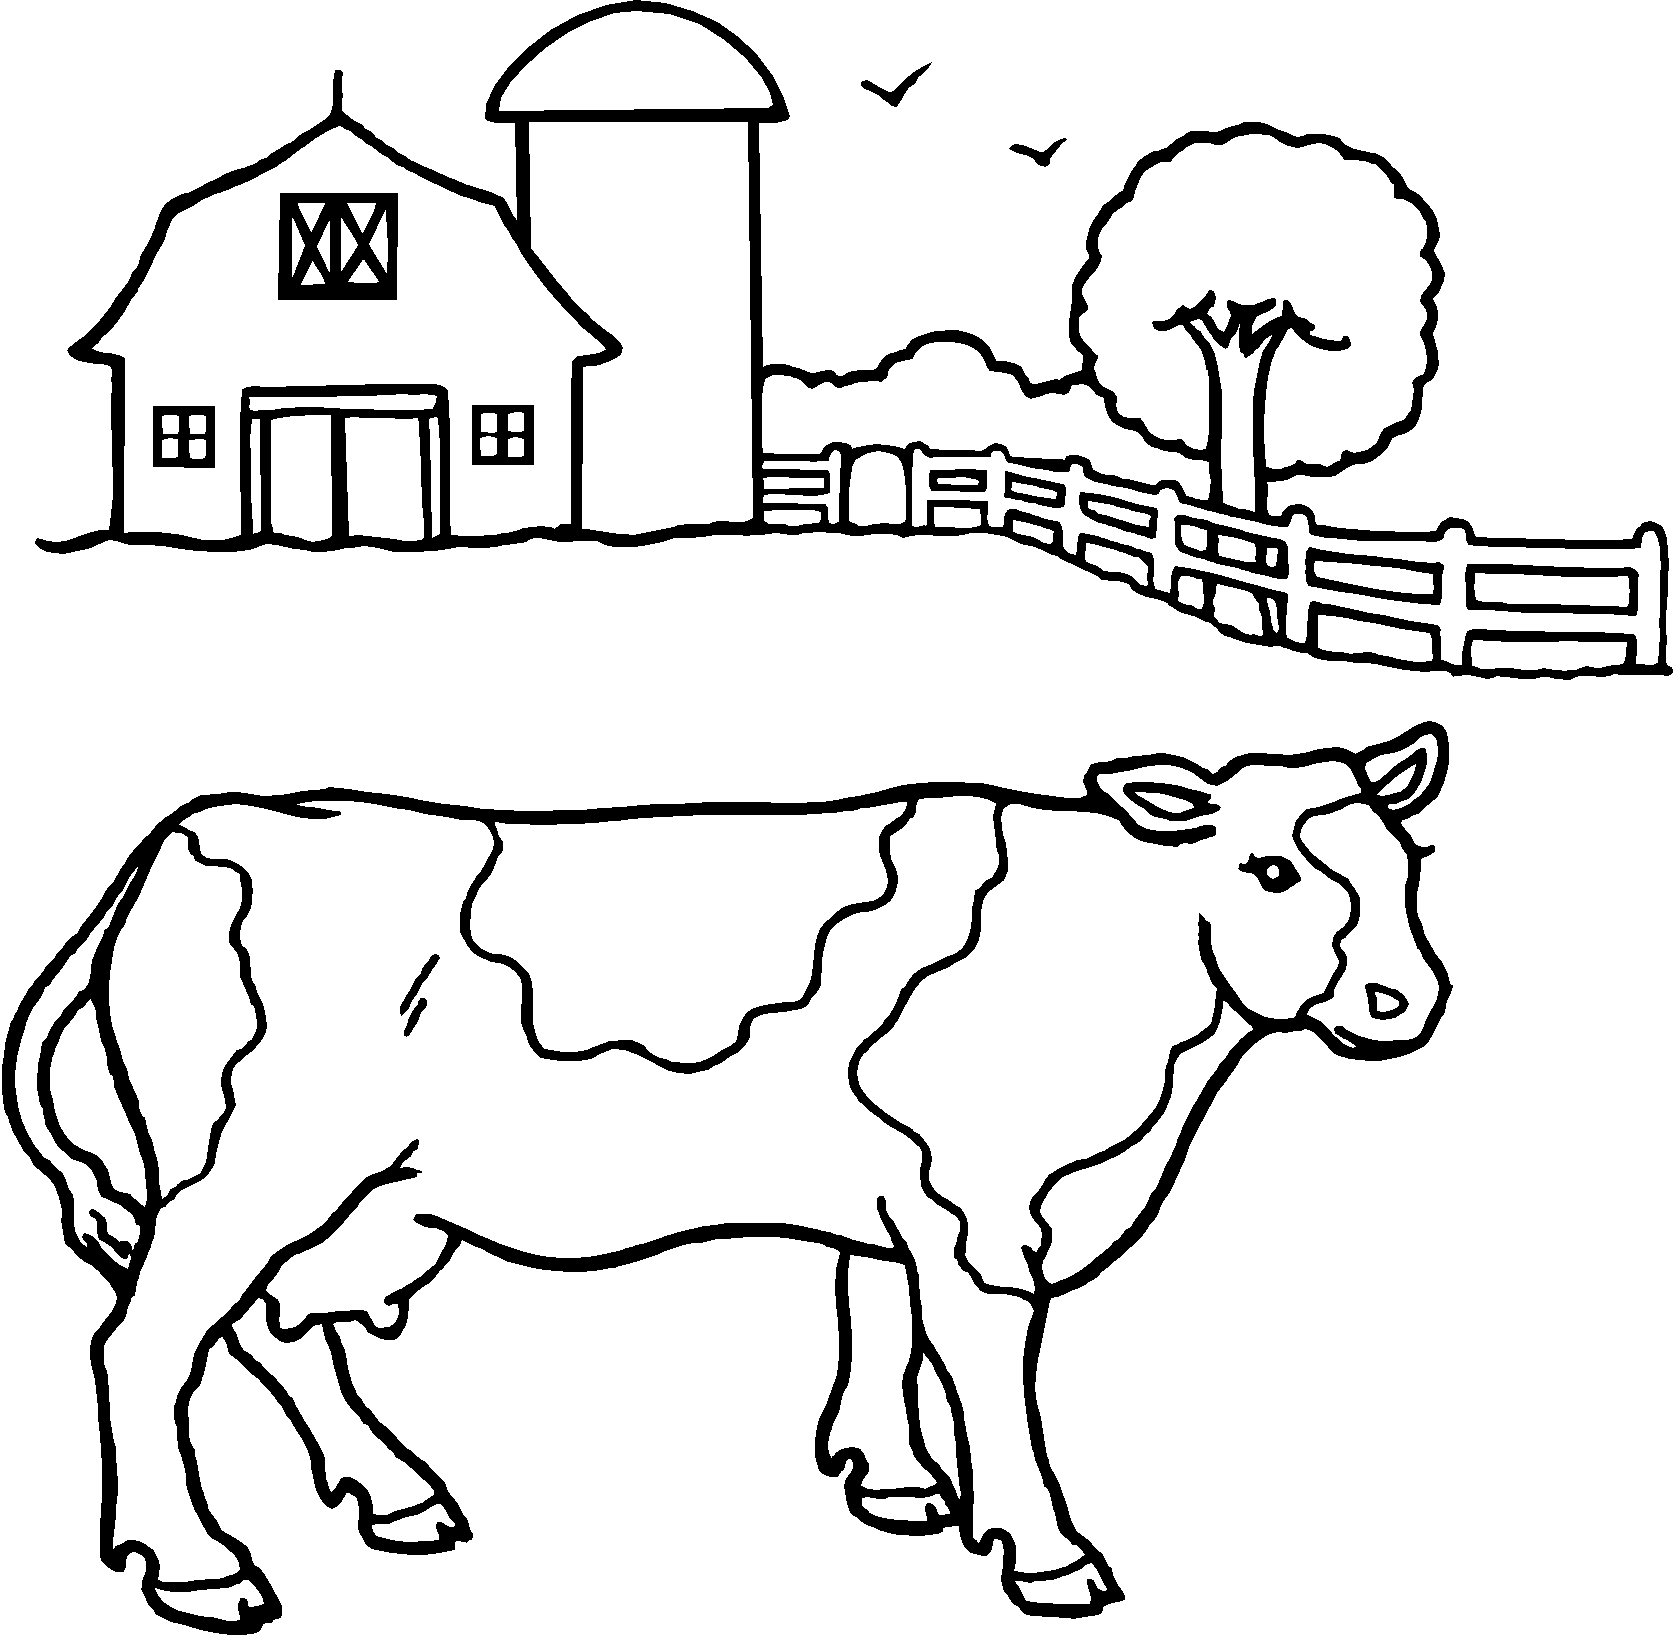 Free Printable Cow Coloring Sheets | Coloring - Coloring Home